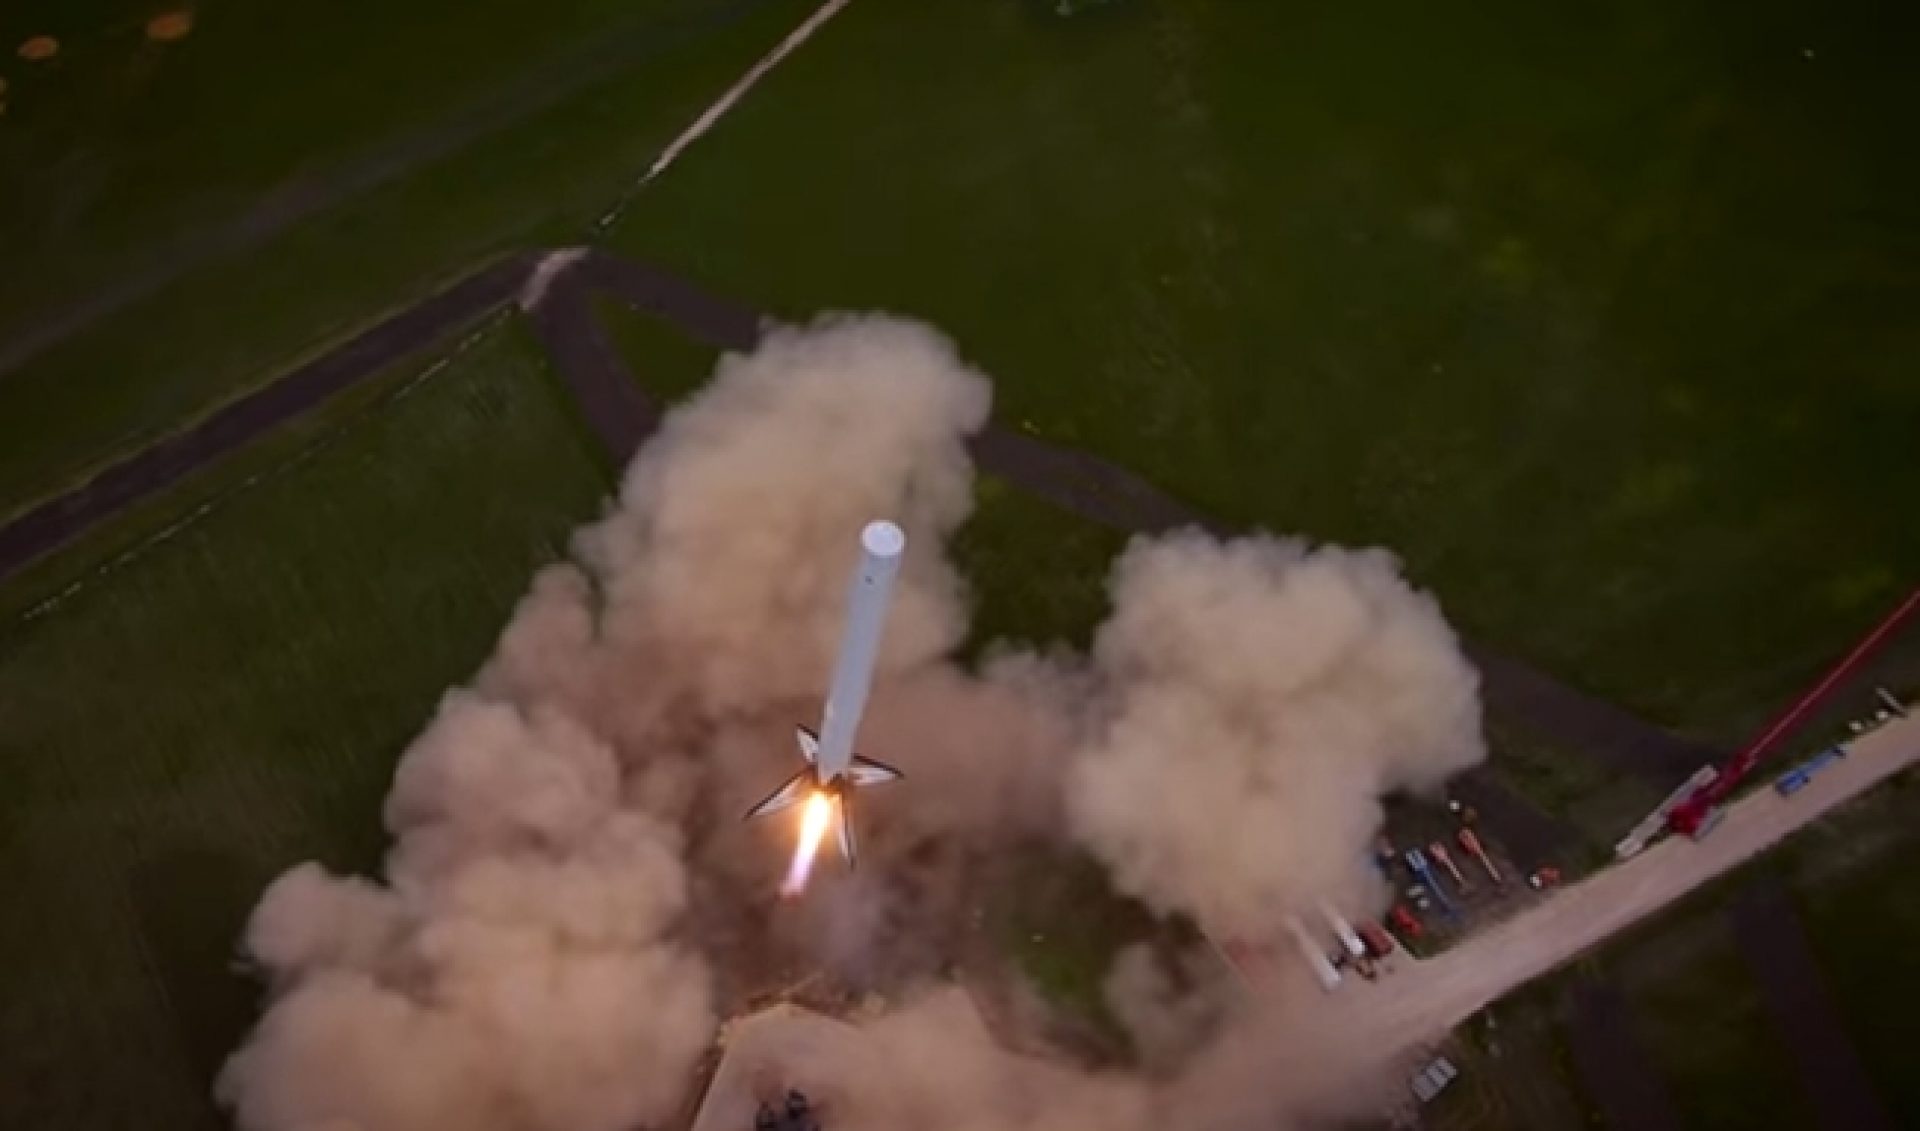 SpaceX’s Reusable Rocket Test Gets 2.4 Million Views In Three Days